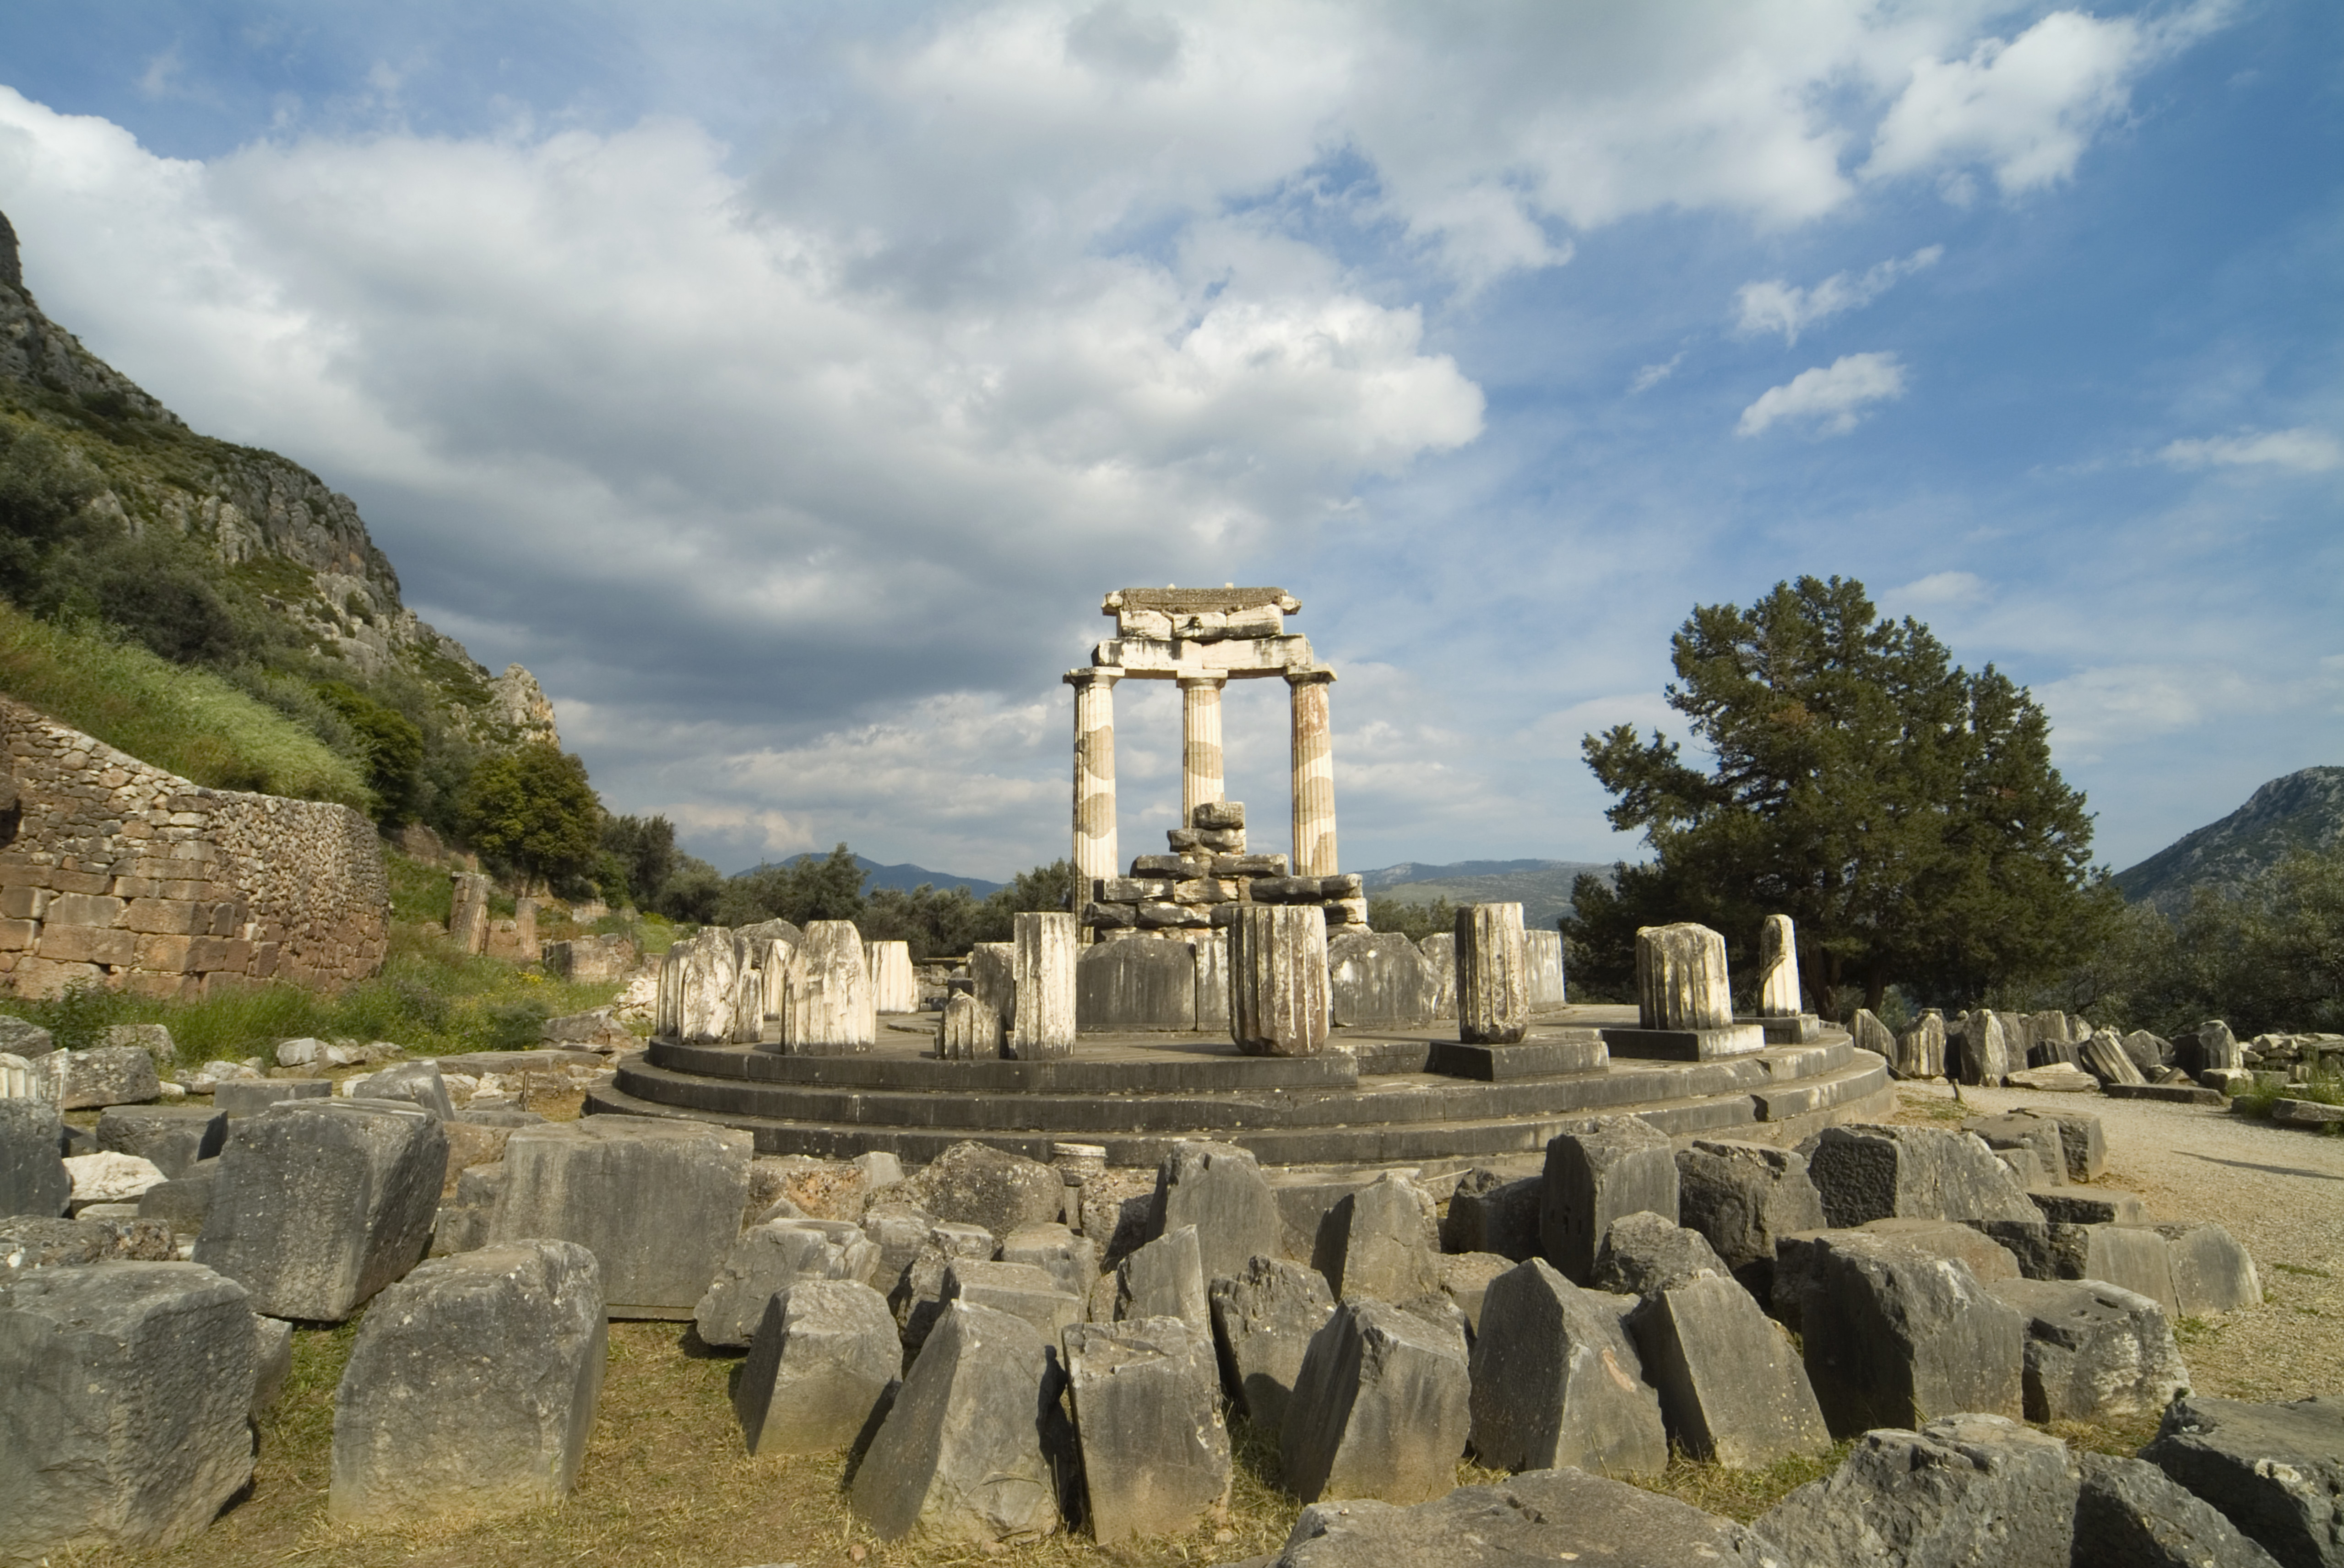 Greek Architecture Pictures - Ancient Greece - HISTORY.com